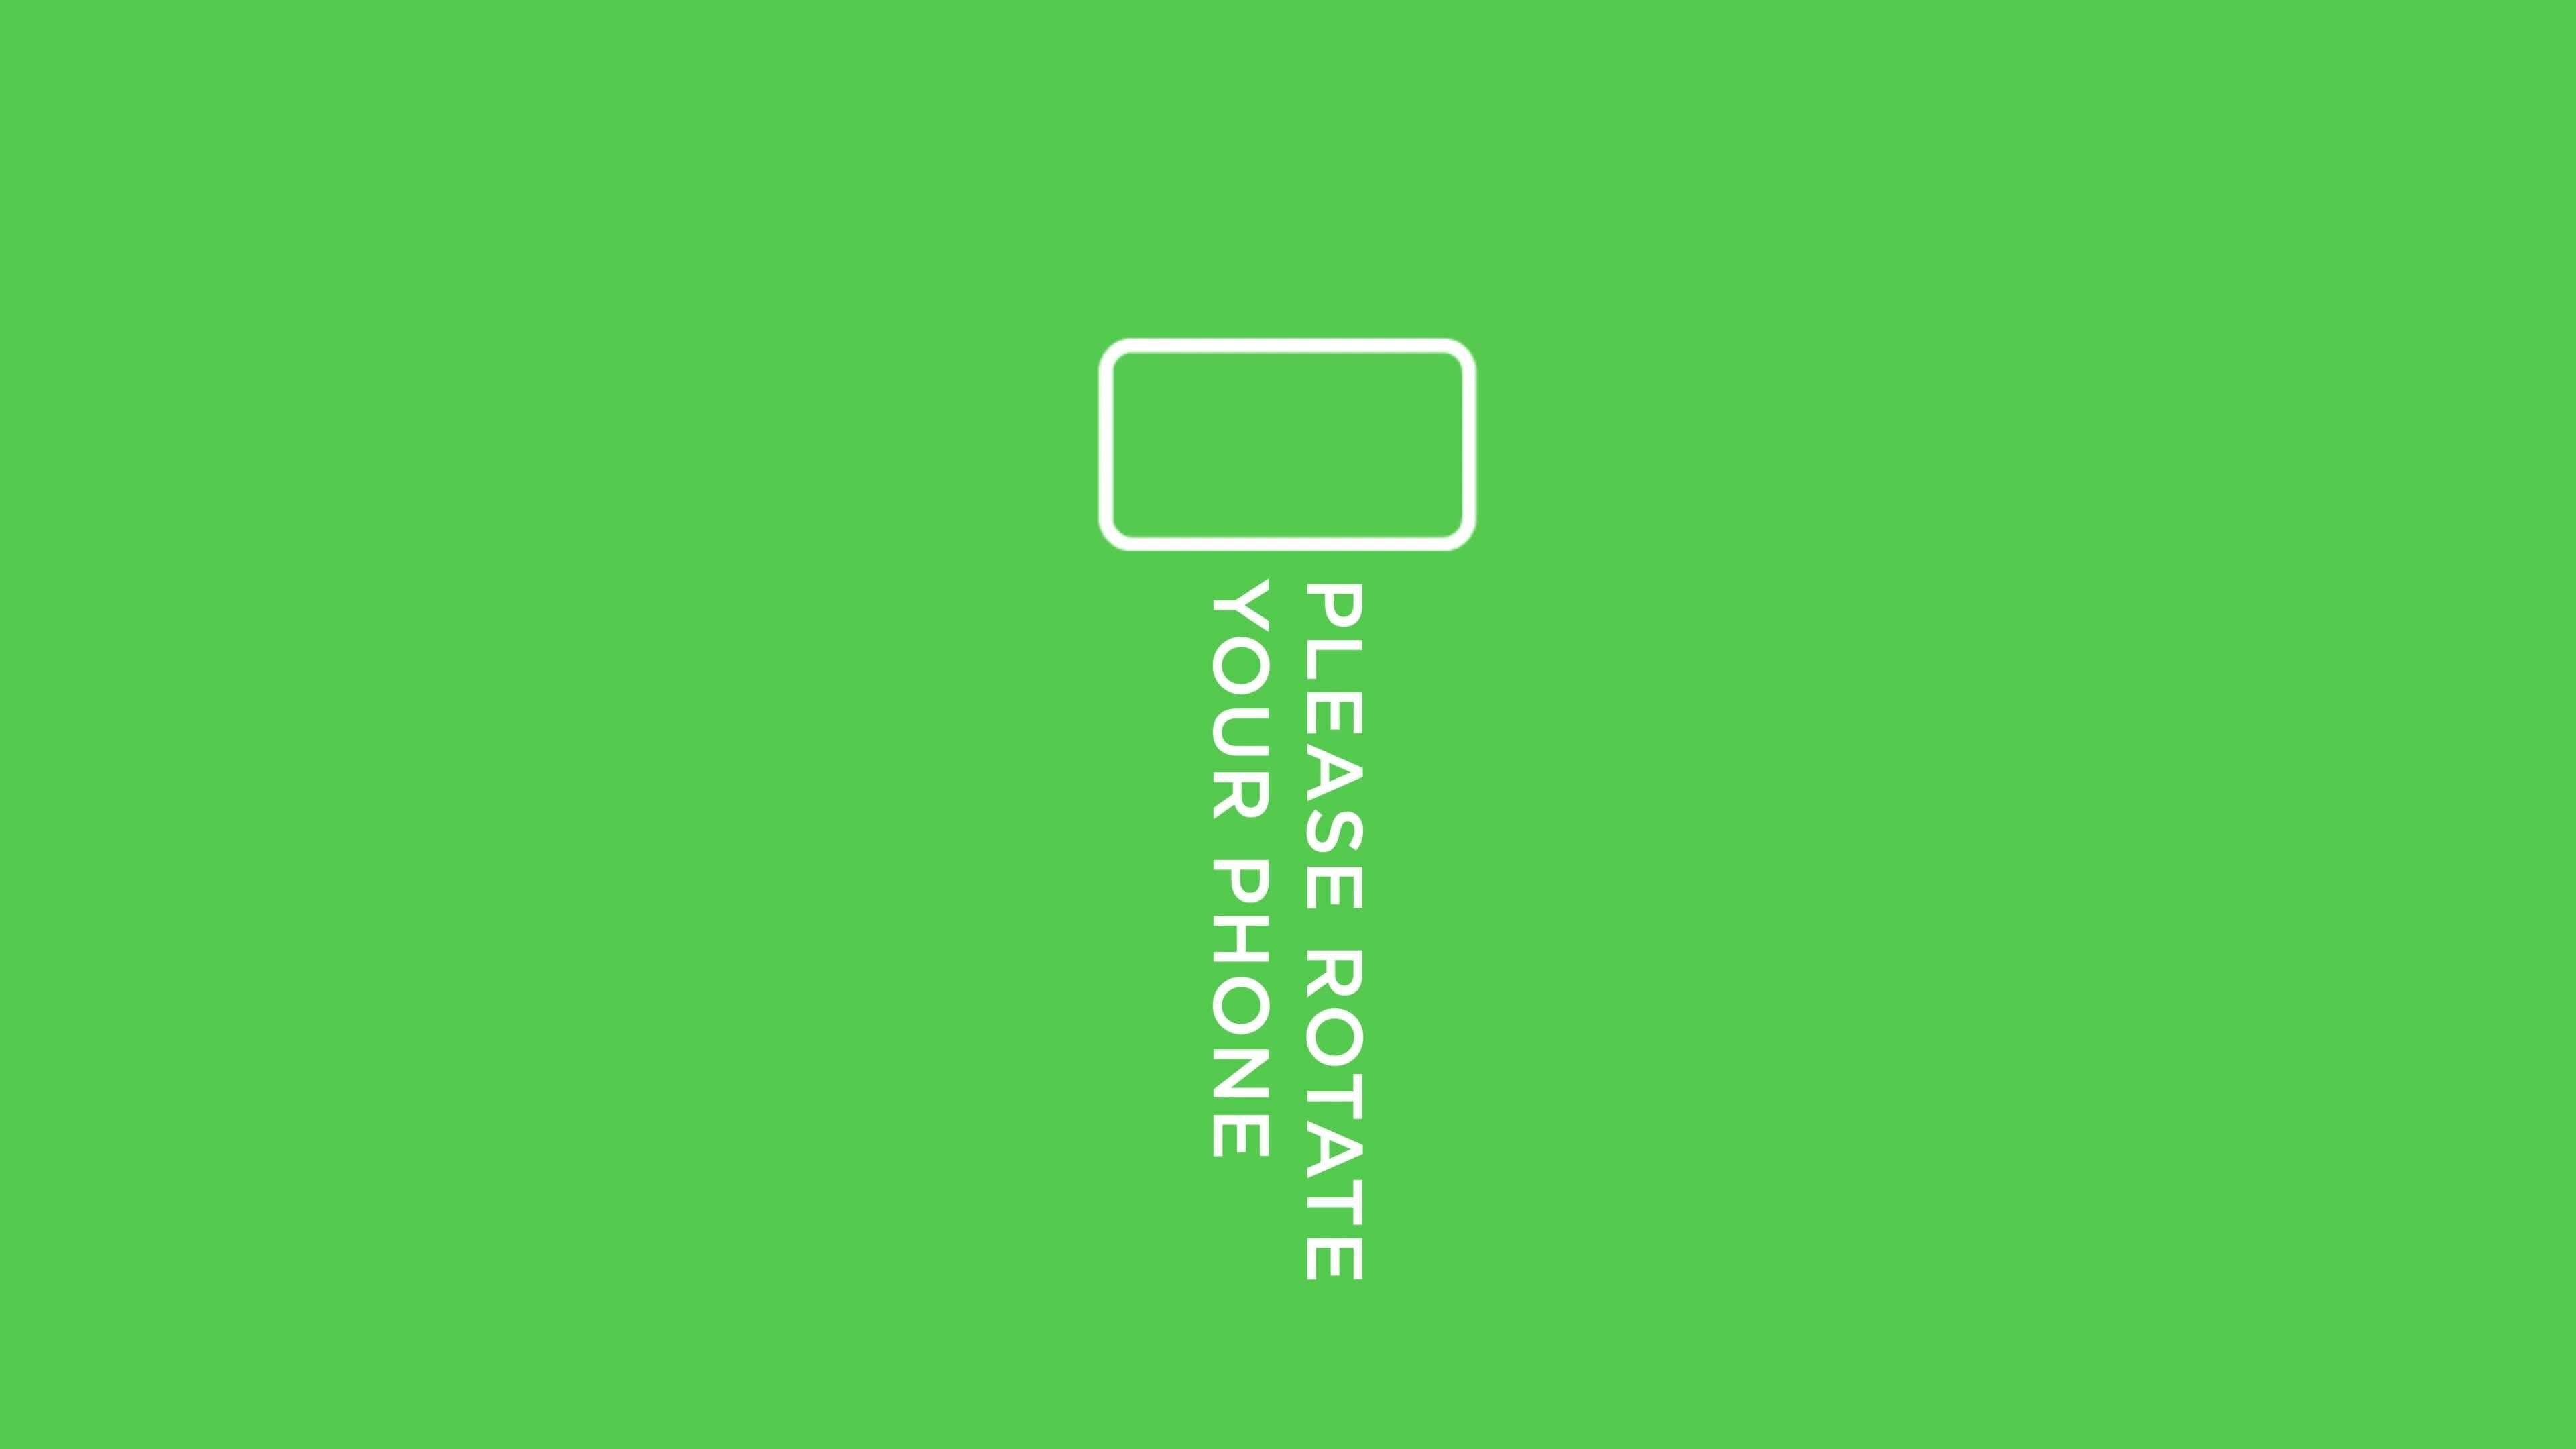 rotate-your-phone-green-screen-animation-26425916-stock-video-at-vecteezy